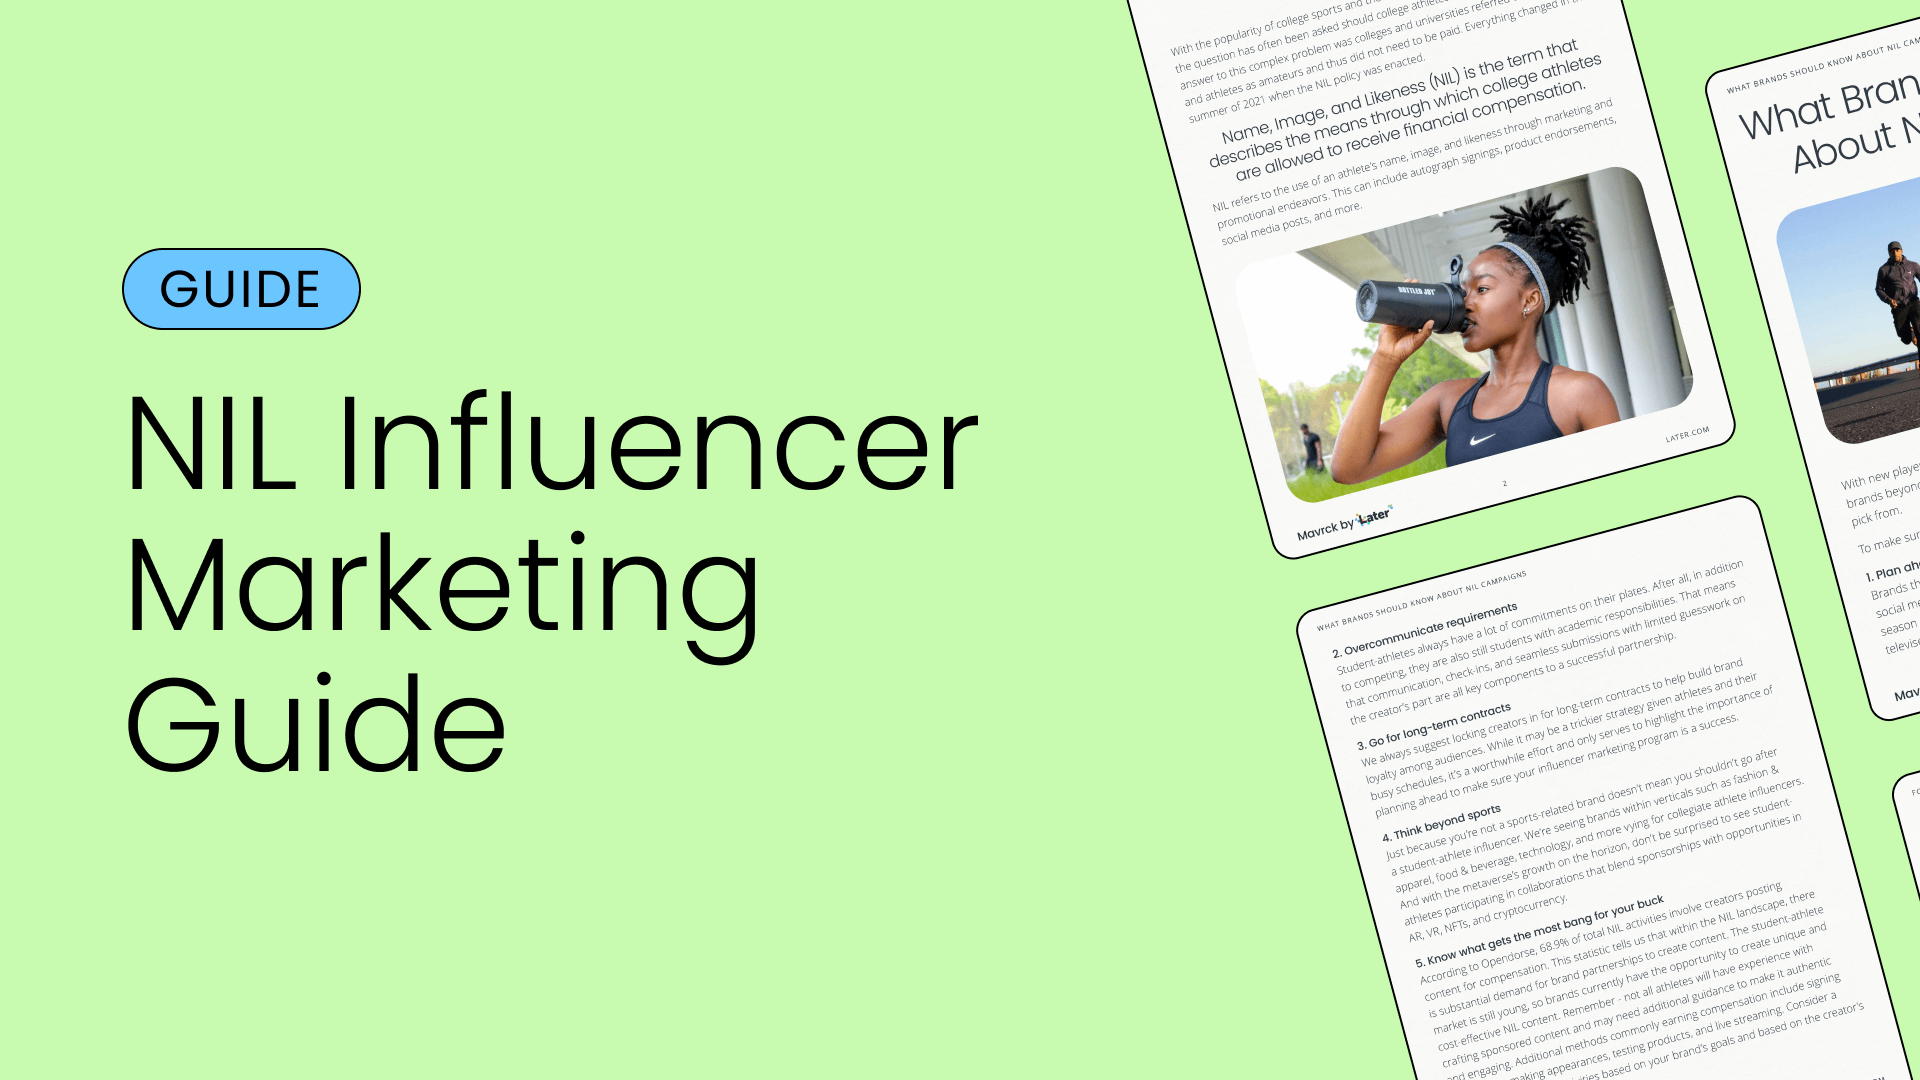 Free NIL influencer marketing guide from Later